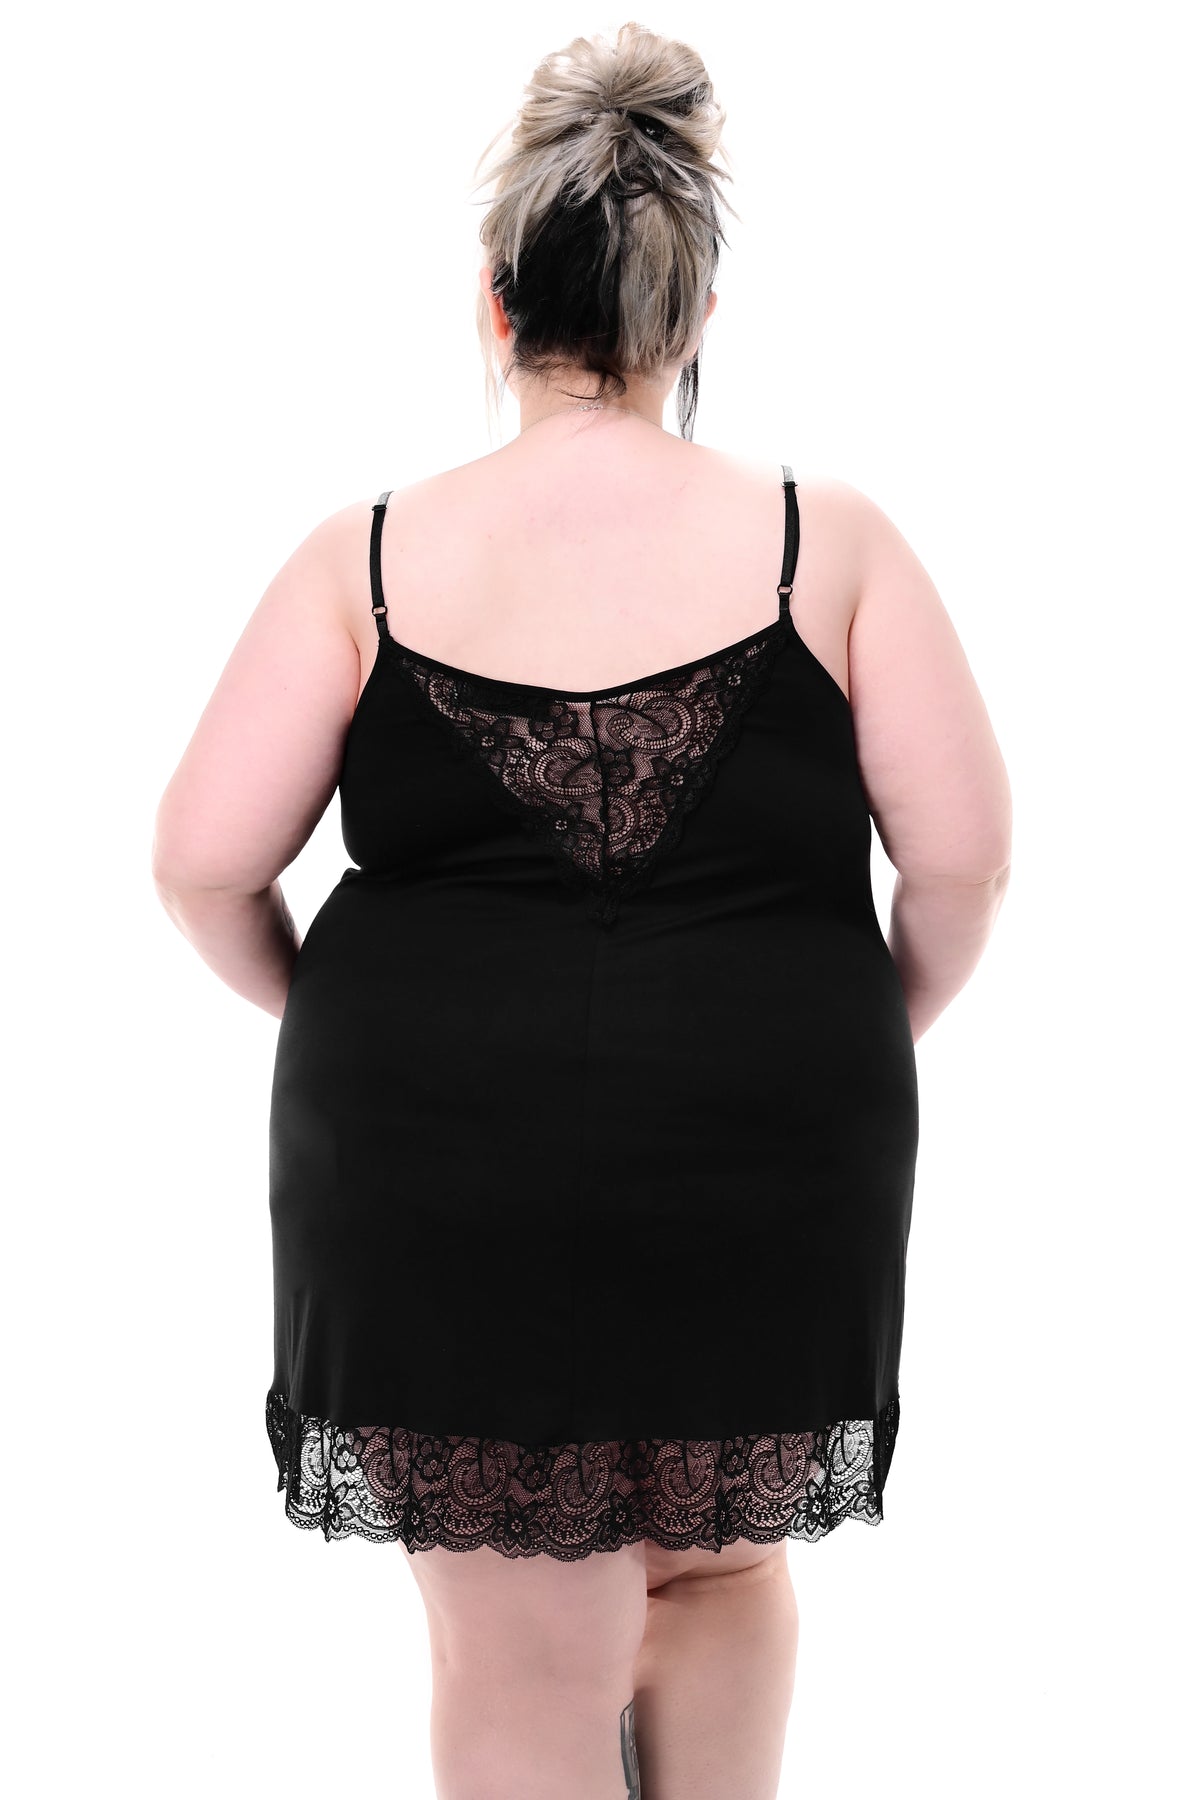 short black slip dress with lace trim and front/back lace panels